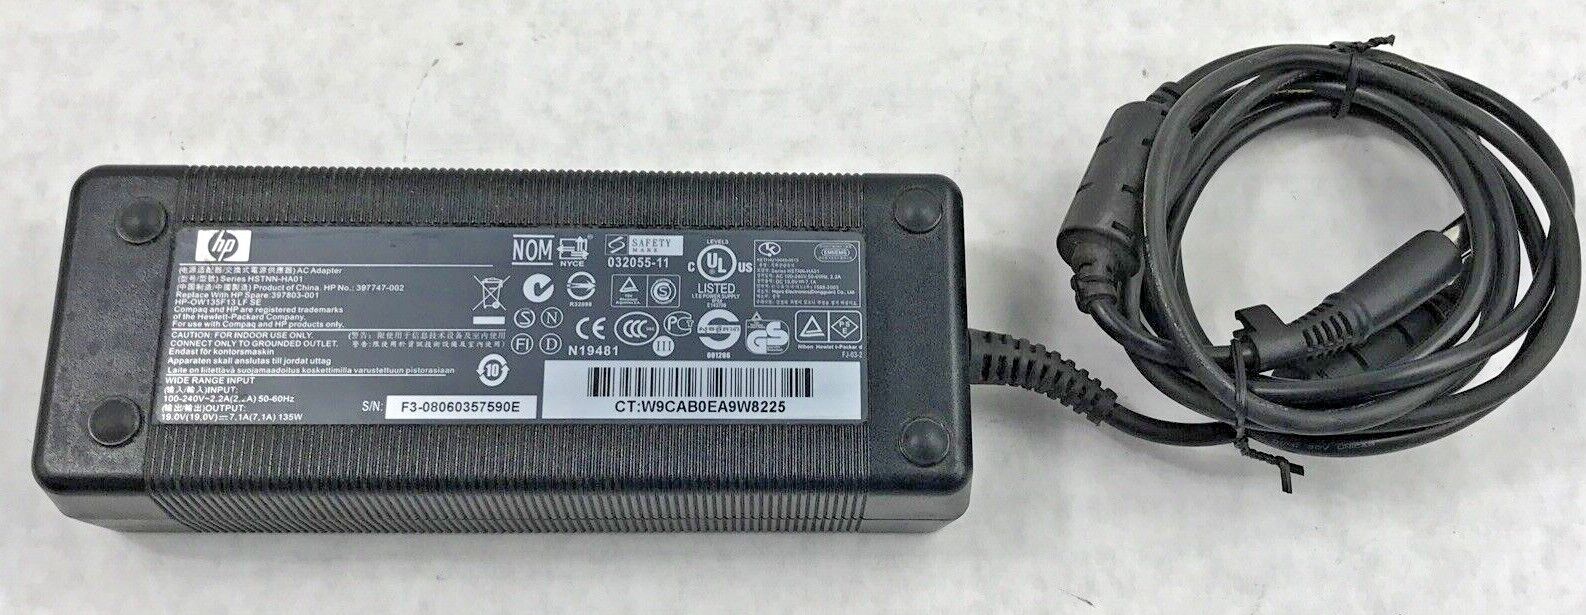 HP 397747-002 135W 19V 7.1A AC Adapter for DC7800 DC7900 8300 800 G1 USDT